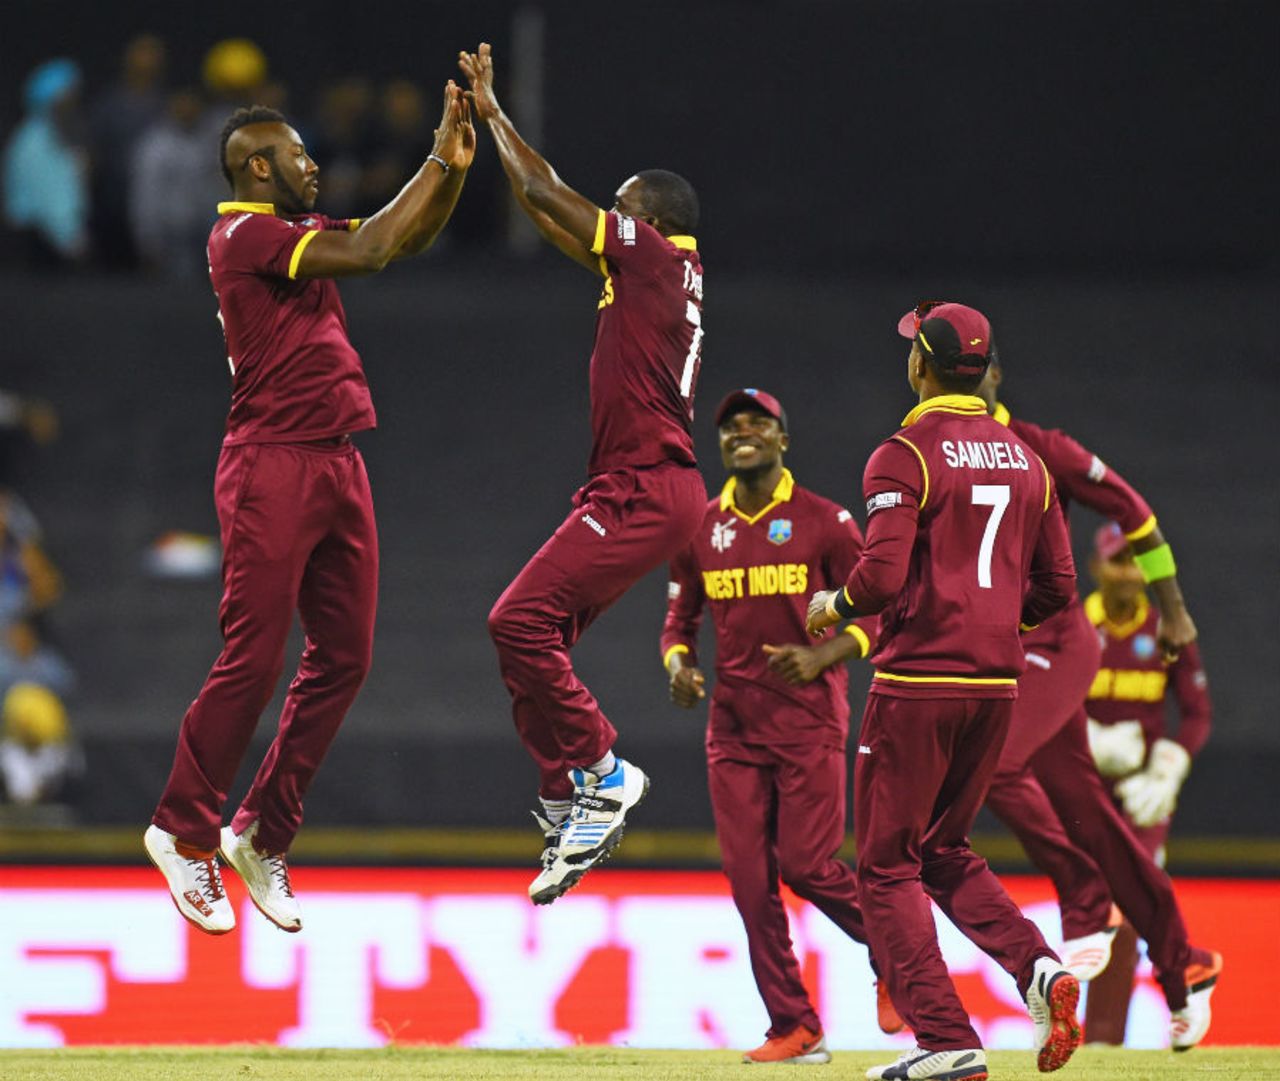 West Indies players celebrate the wicket of Rohit Sharma, India v West Indies, World Cup 2015, Group B, Perth, March 6